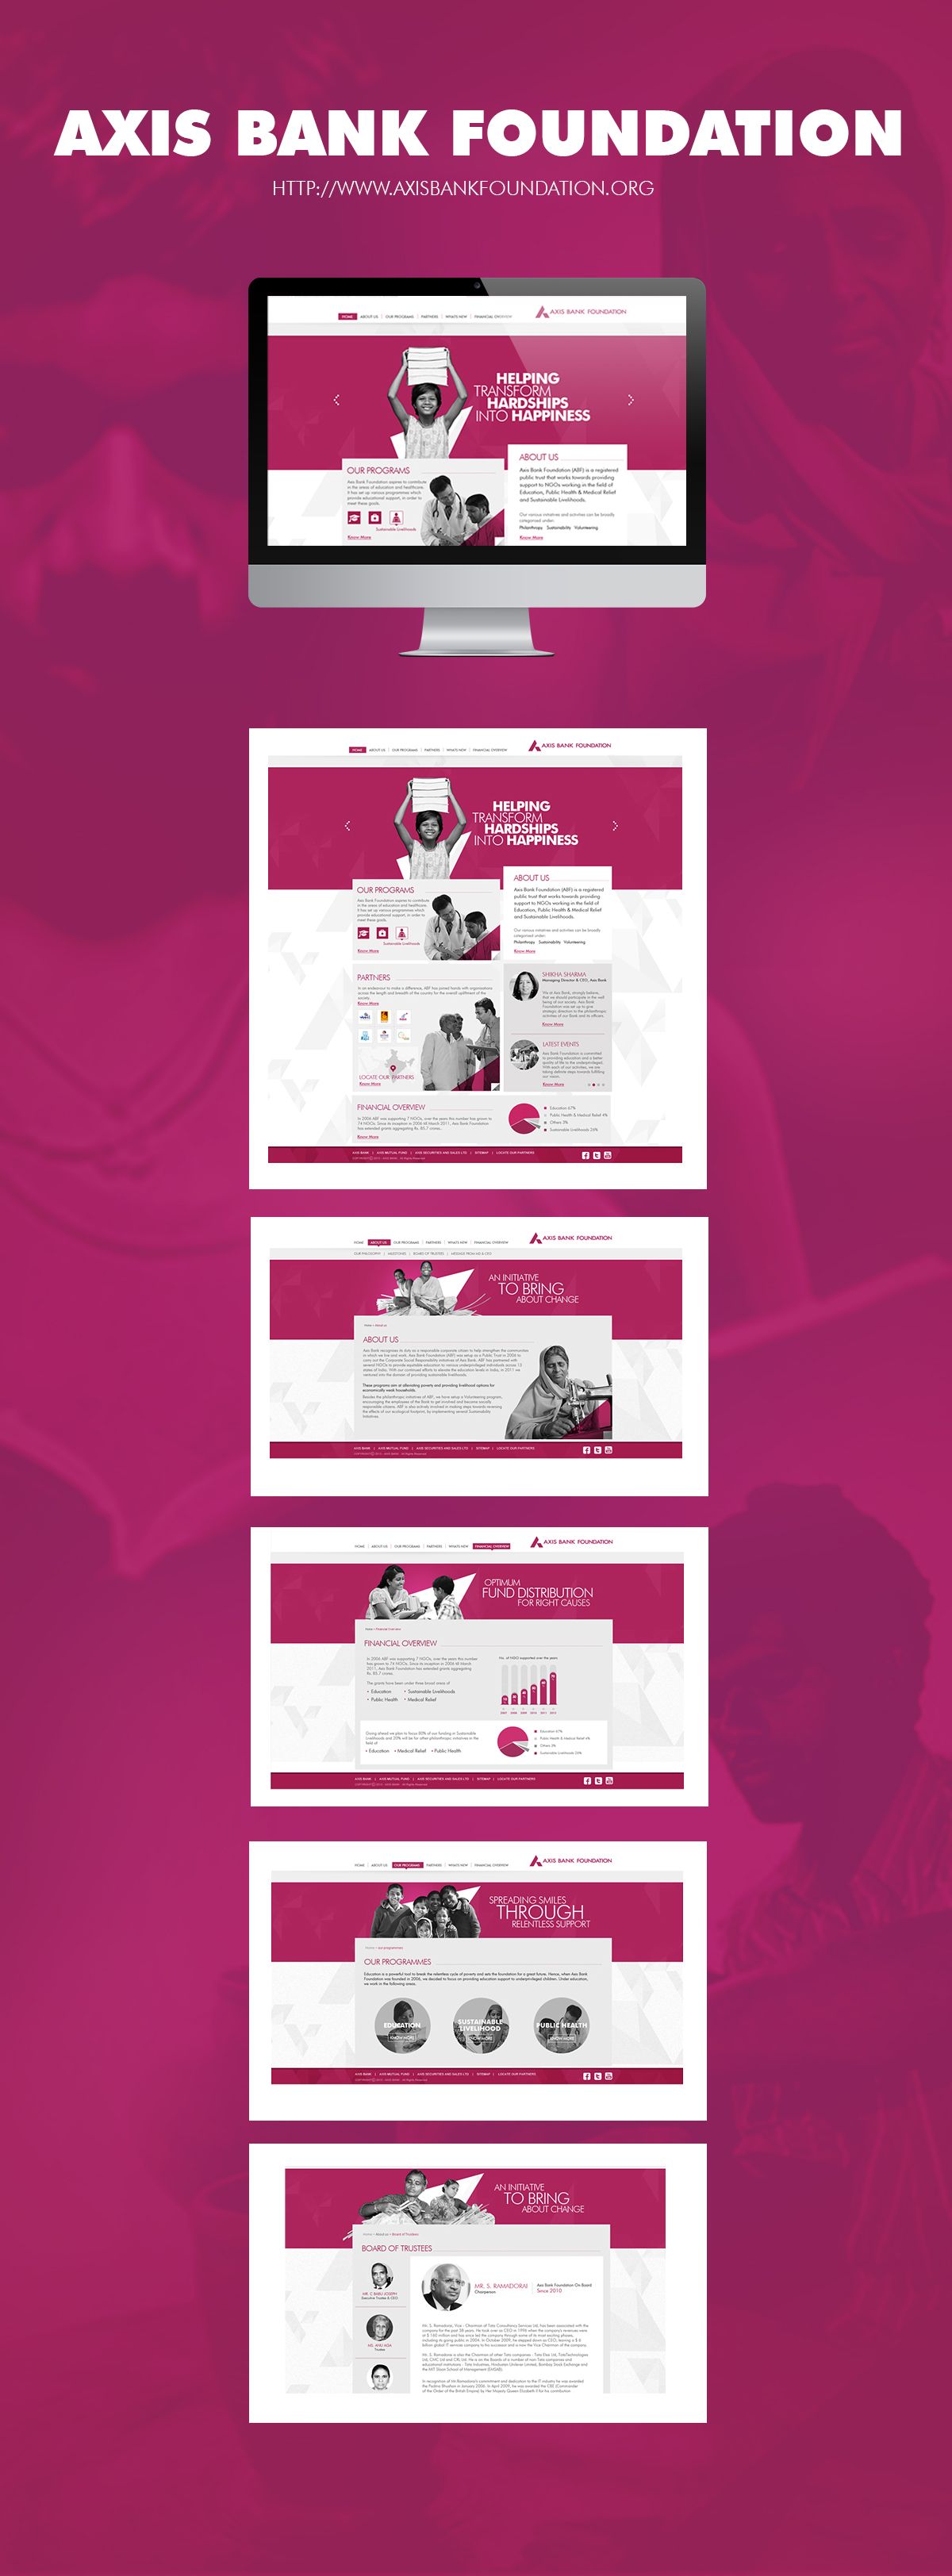 Axis Bank Foundation Website